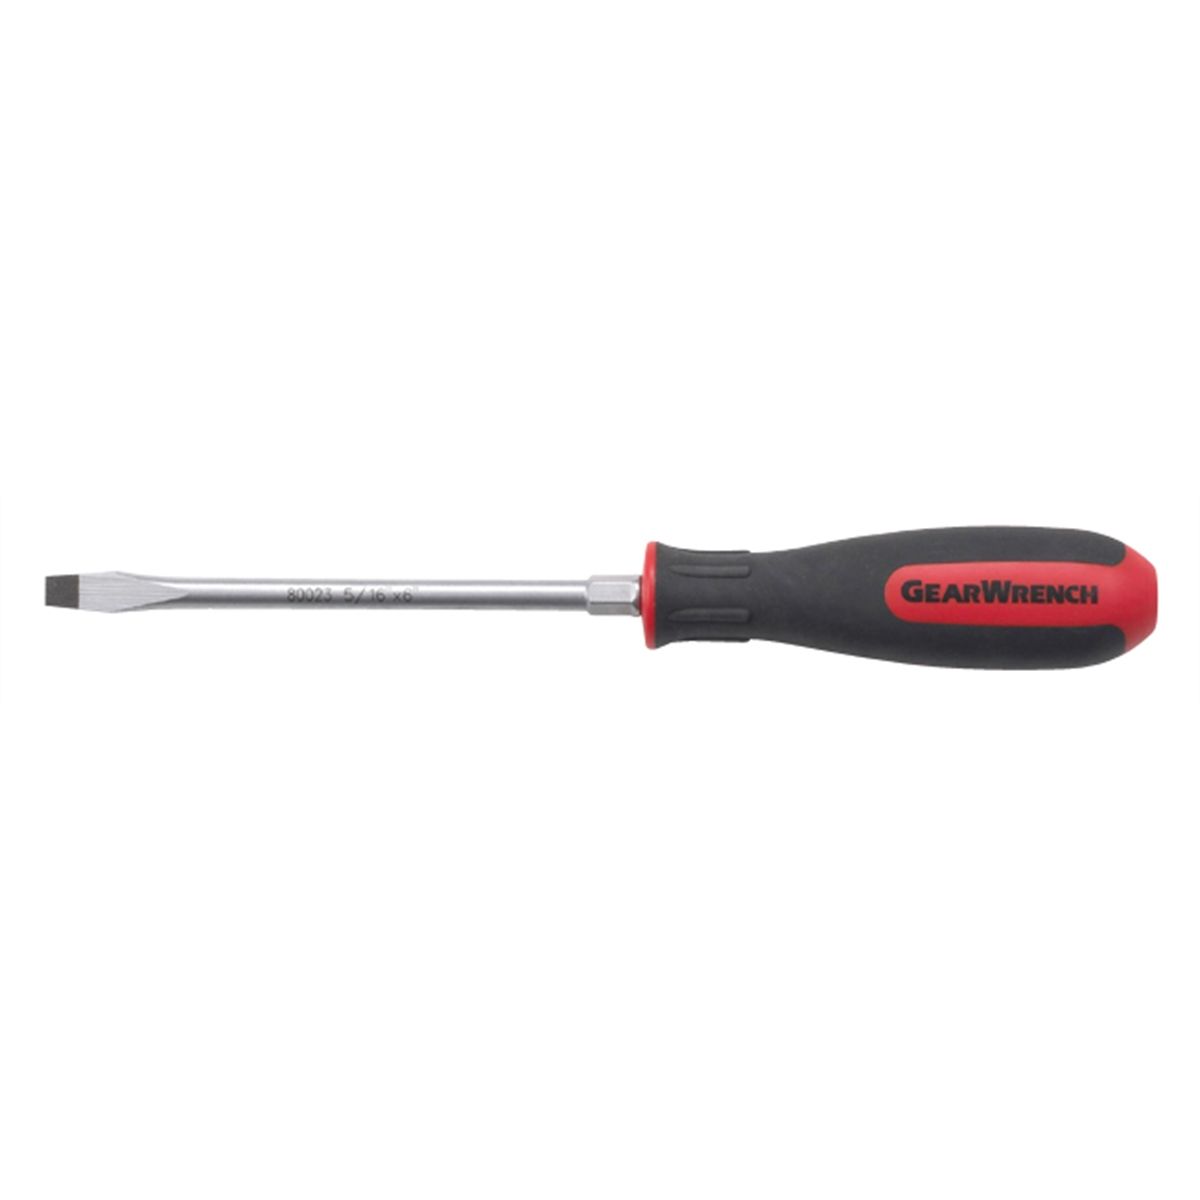 5/16" x 6" Slotted Screwdriver